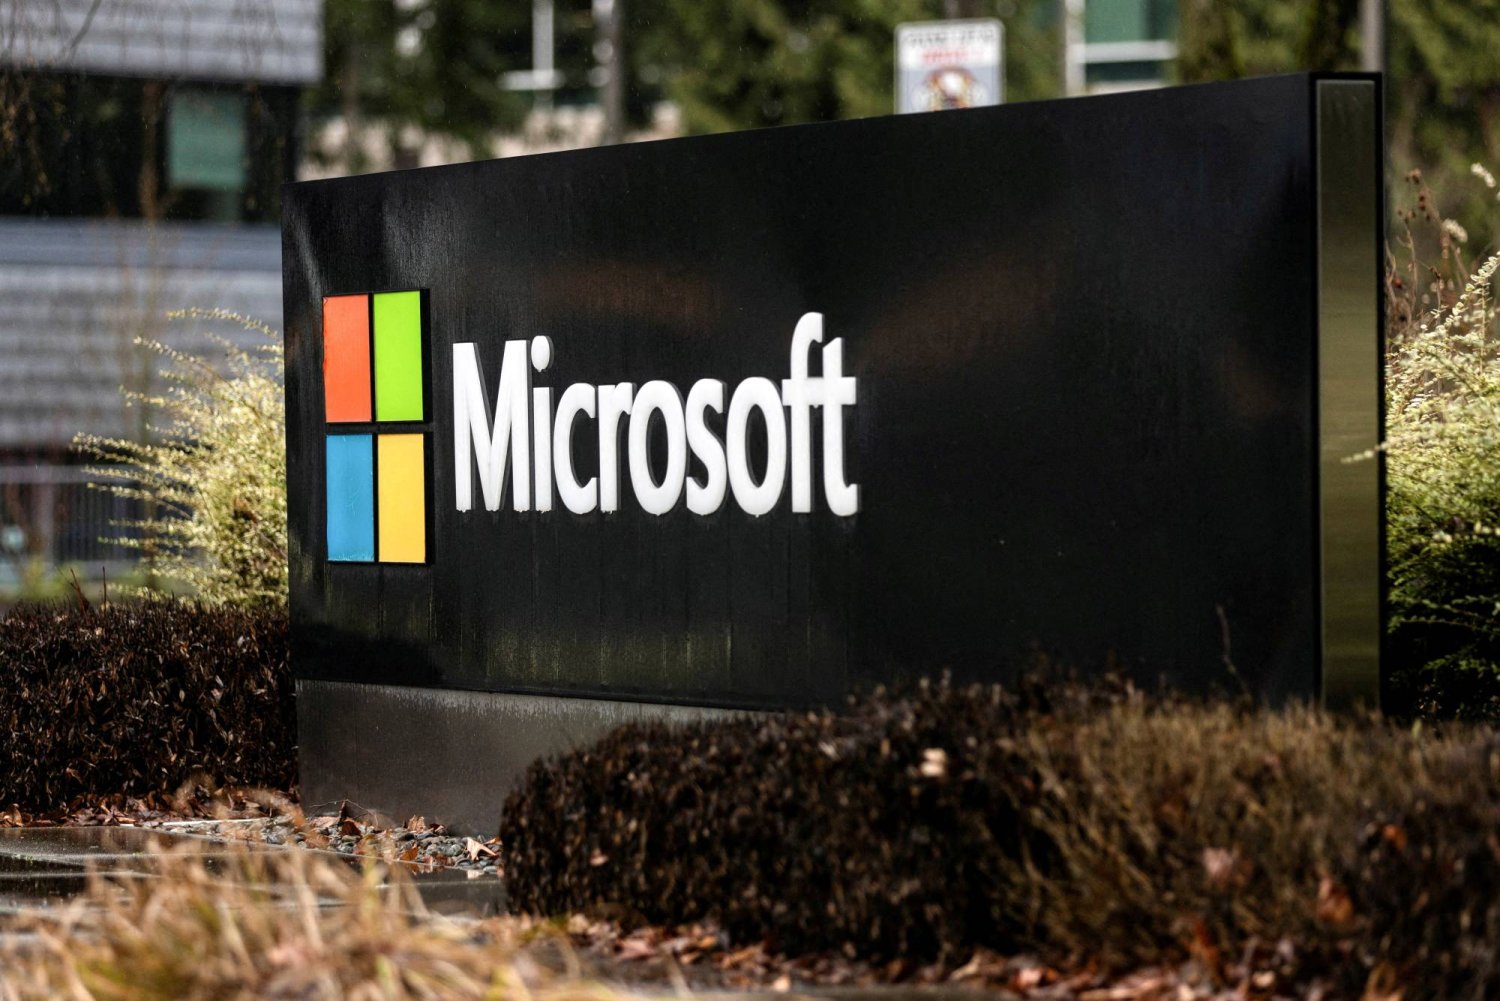 Microsoft and European Energy Partner on Power Purchase Agreements